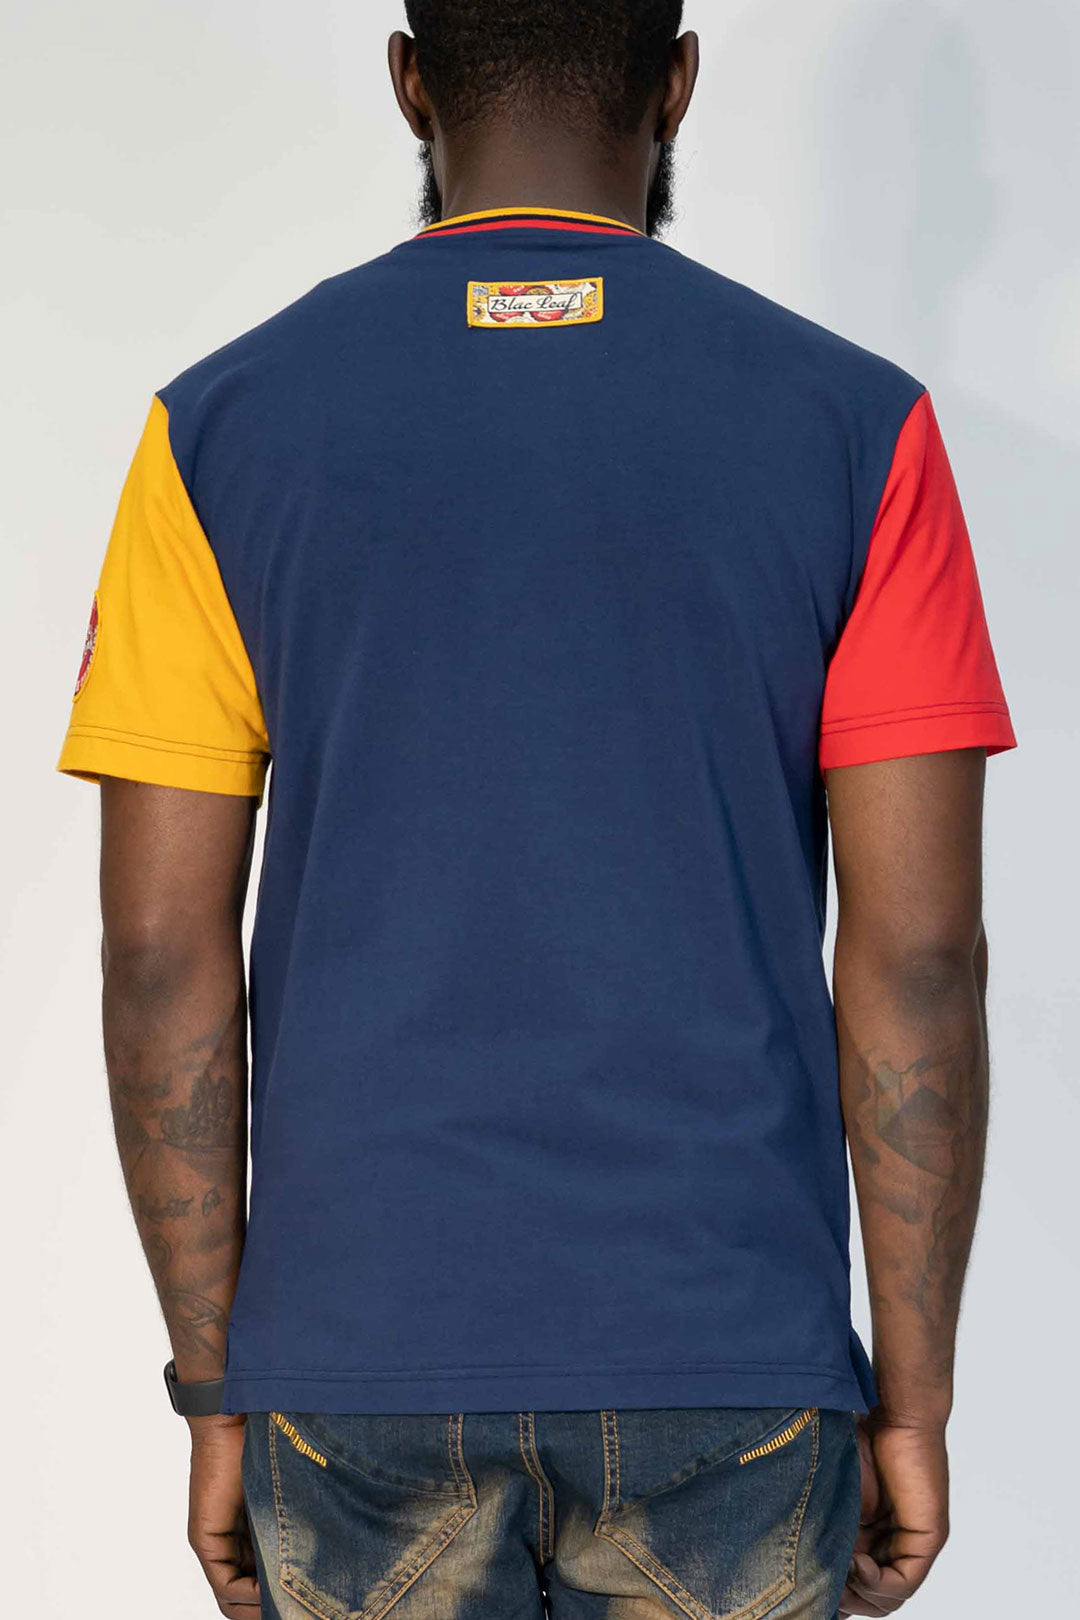 Reel & Chill Colorblock Patch Shirt